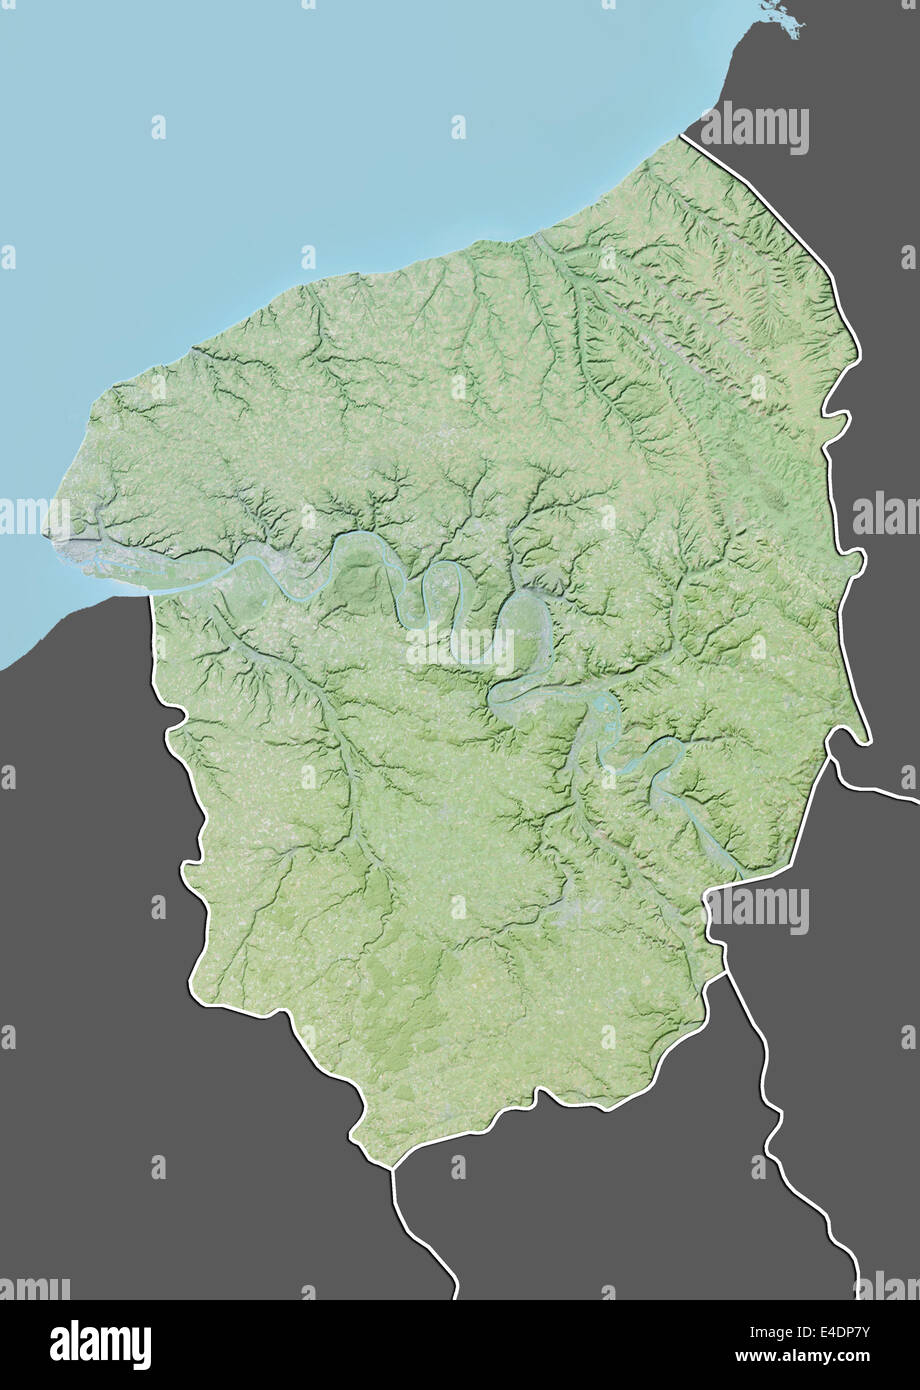 Region of Upper Normandy, France, Relief Map Stock Photo